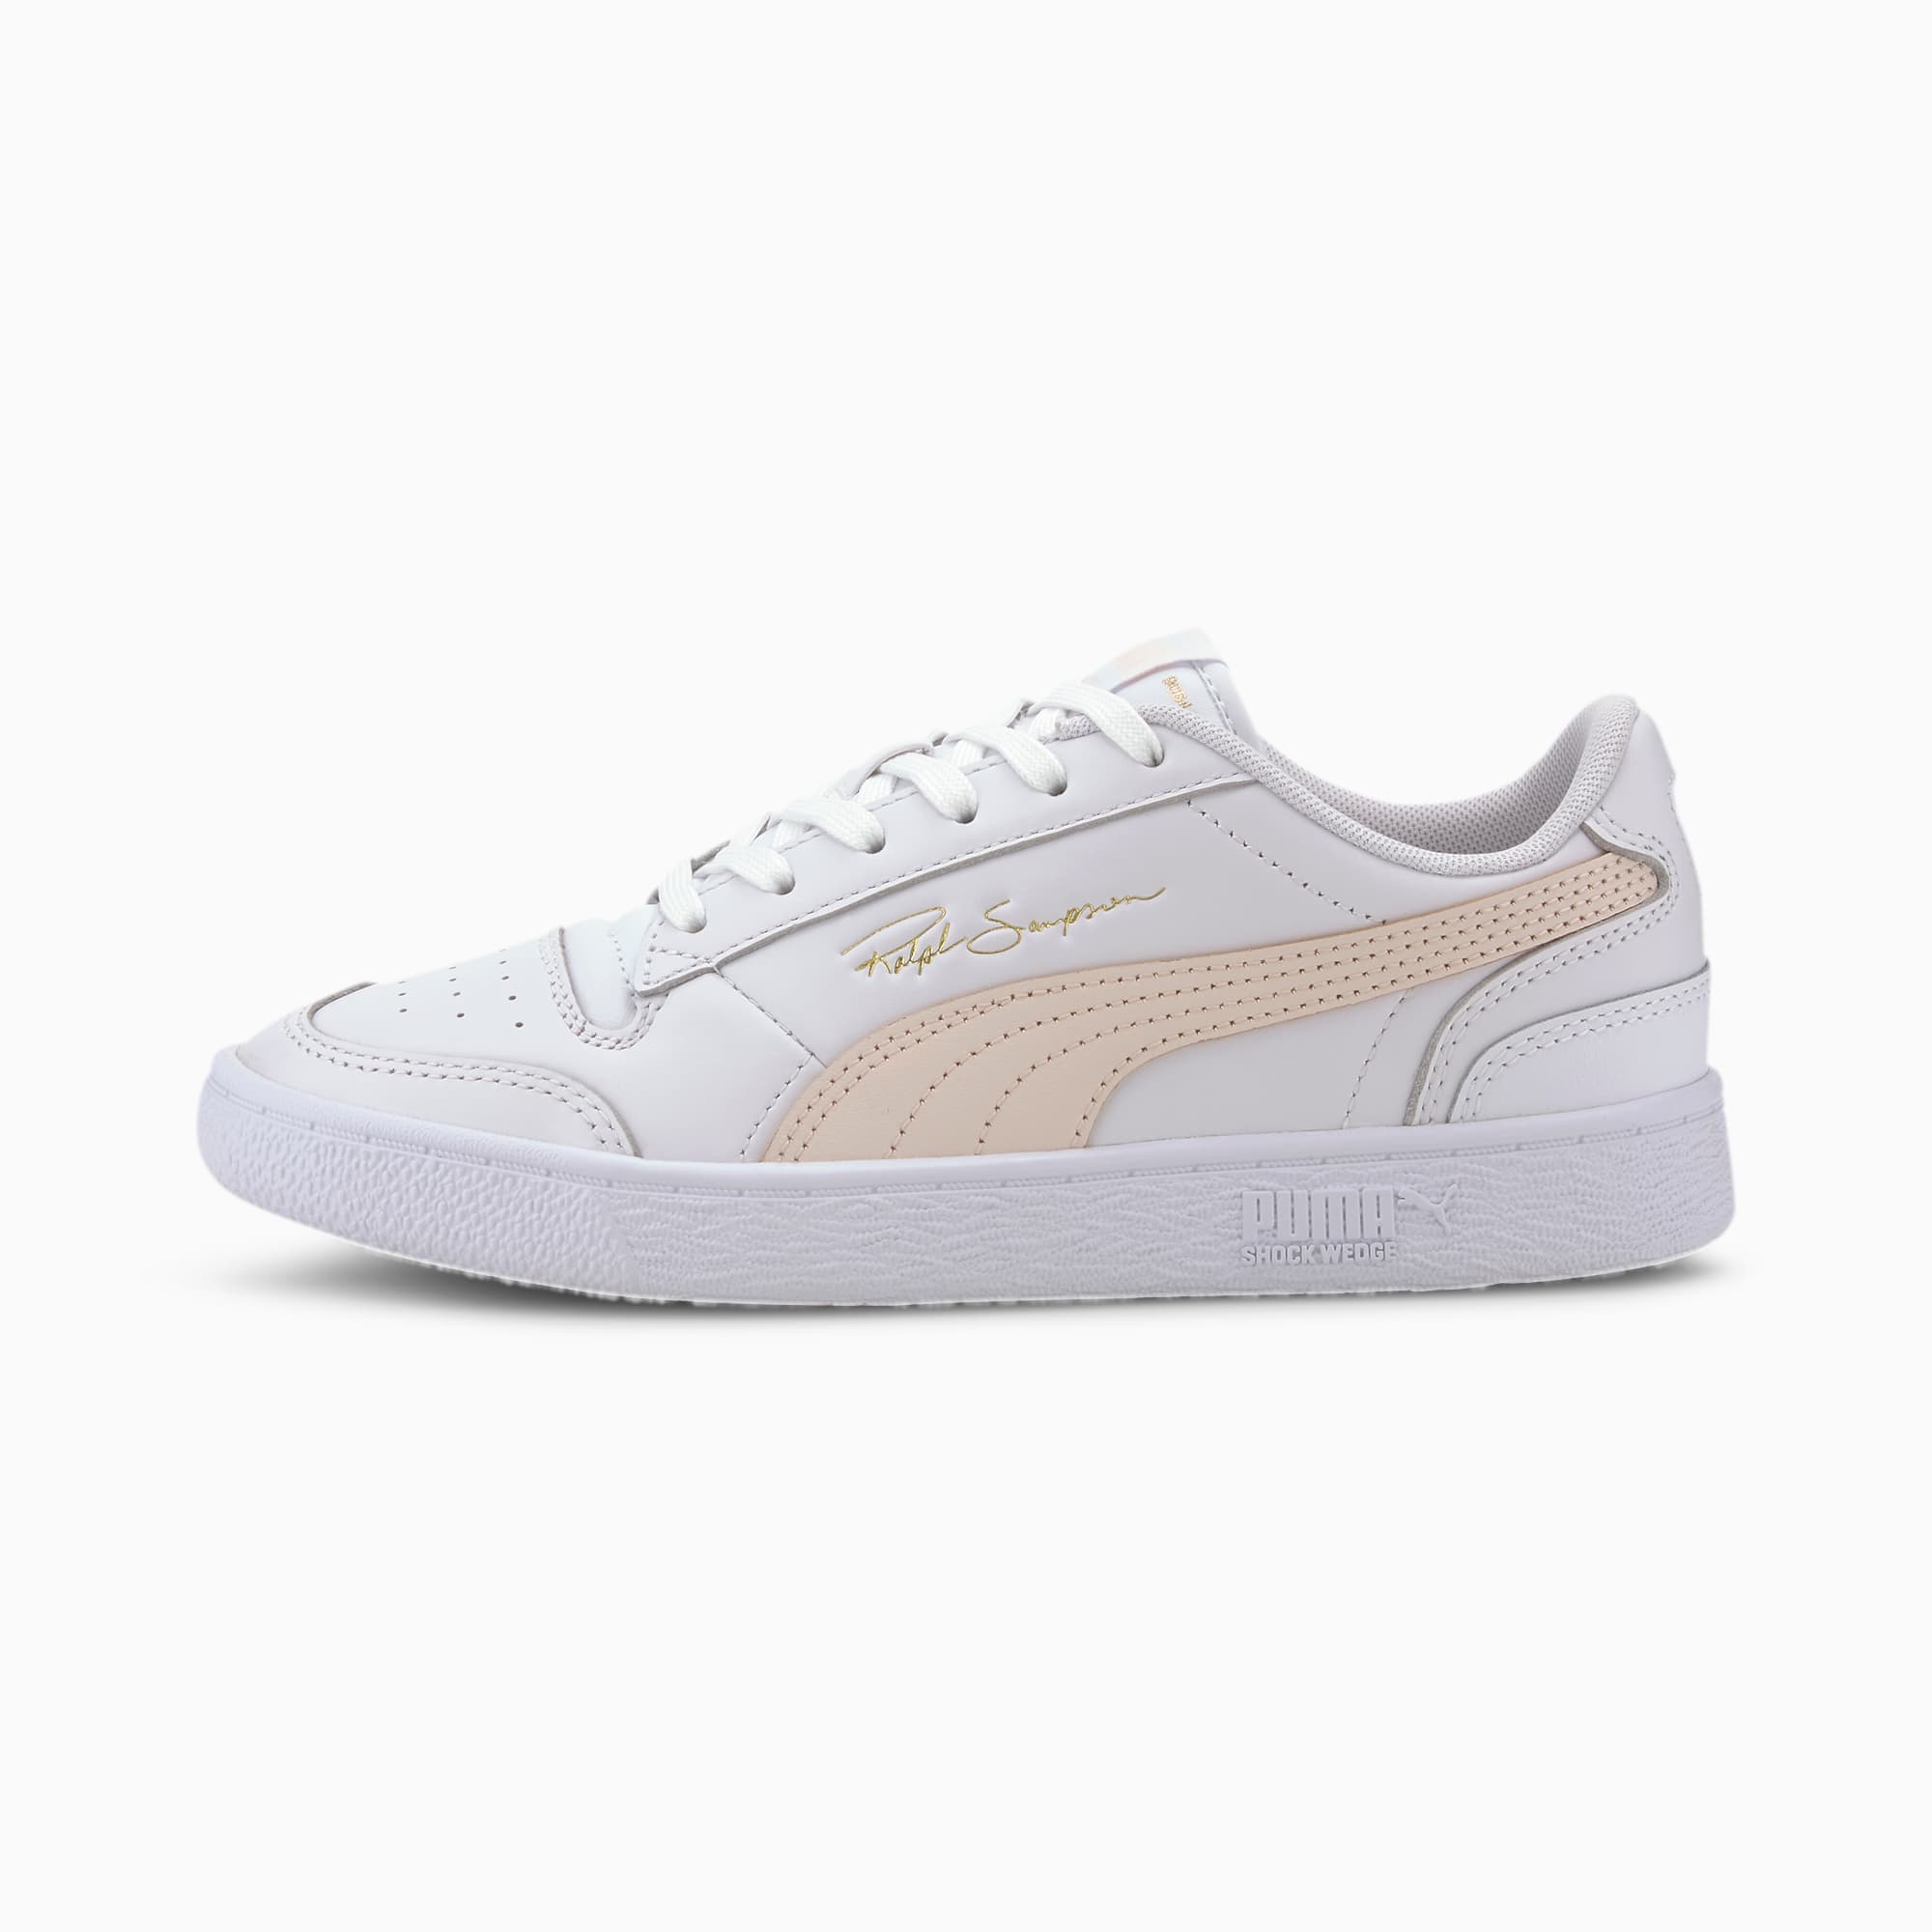 PUMA Chaussure Ralph Sampson Lo sneakers, Blanc/Rose, Taille 37, Chaussures